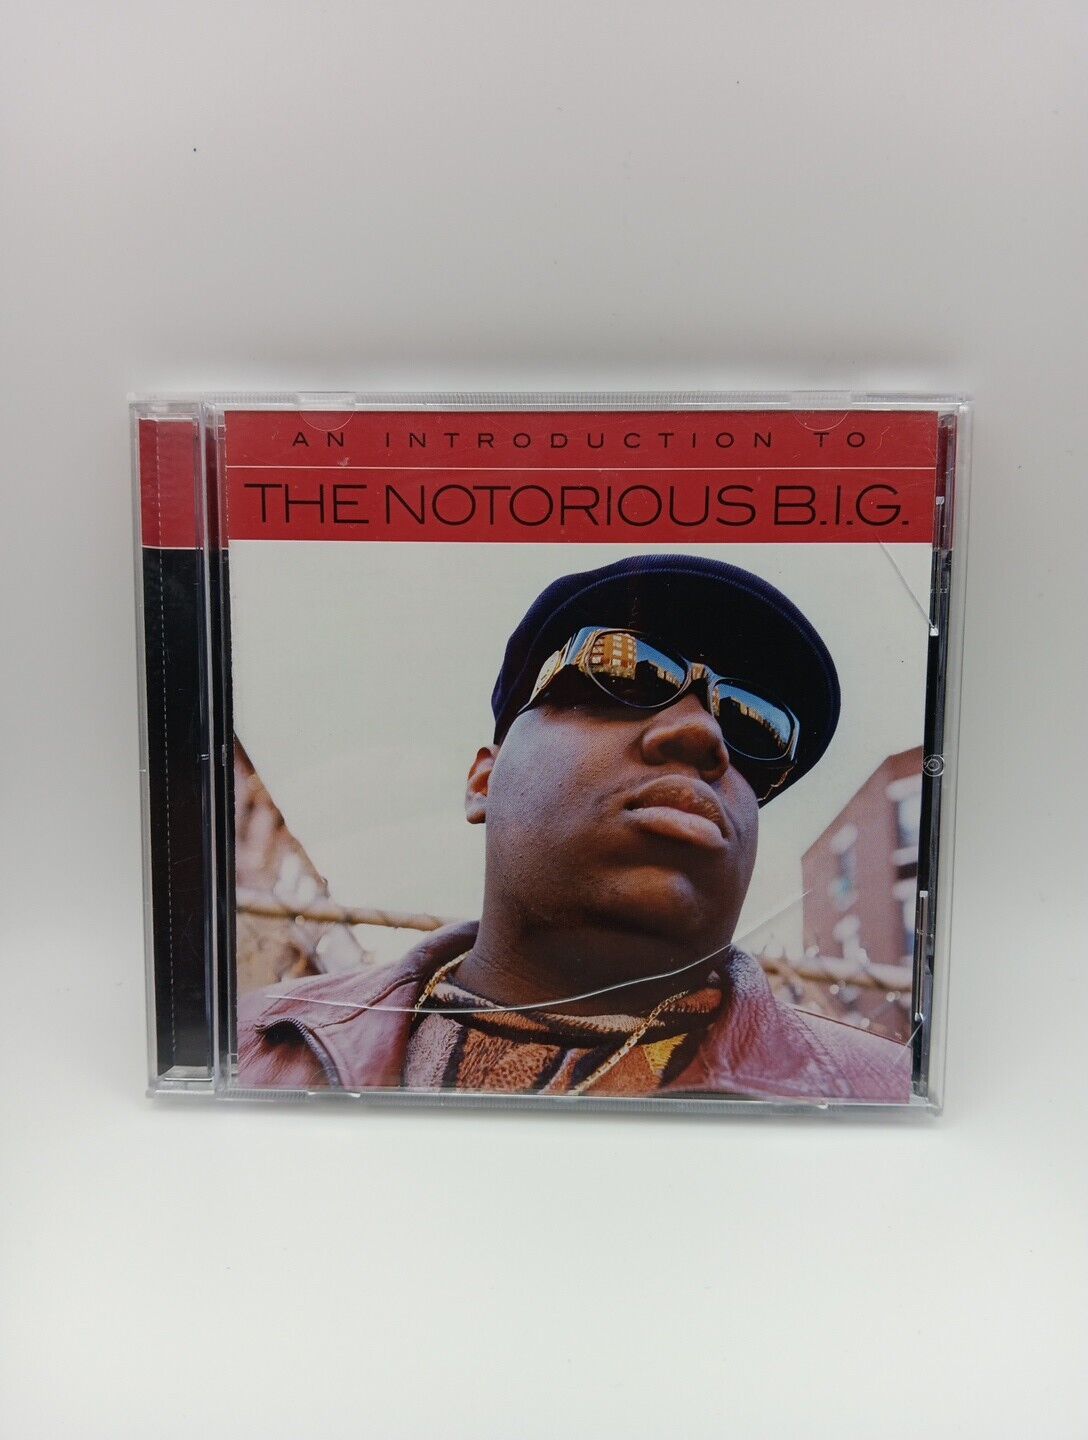 An Introduction To by Notorious B.I.G. (CD, 2019)